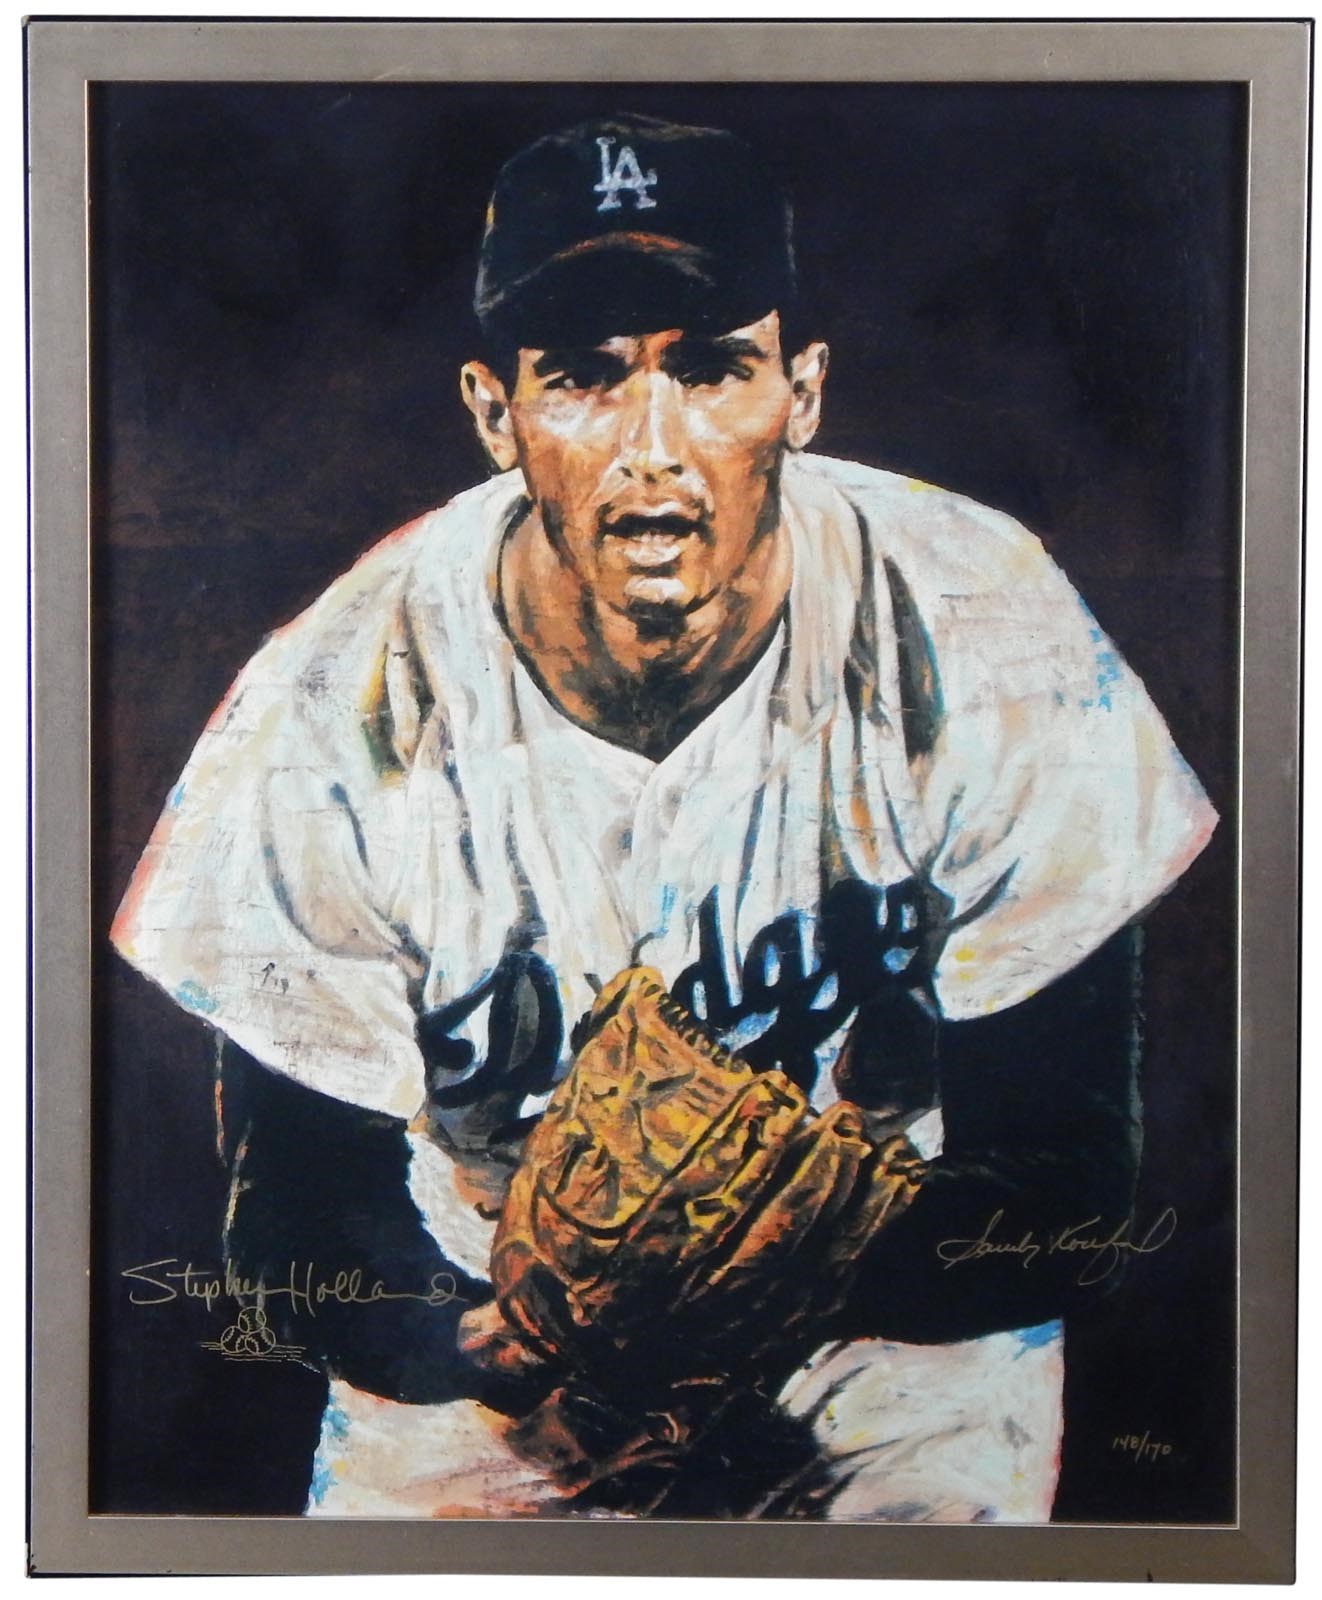 - Koufax "Looking In" Holland Giclee From Sandy Koufax's Personal Collection